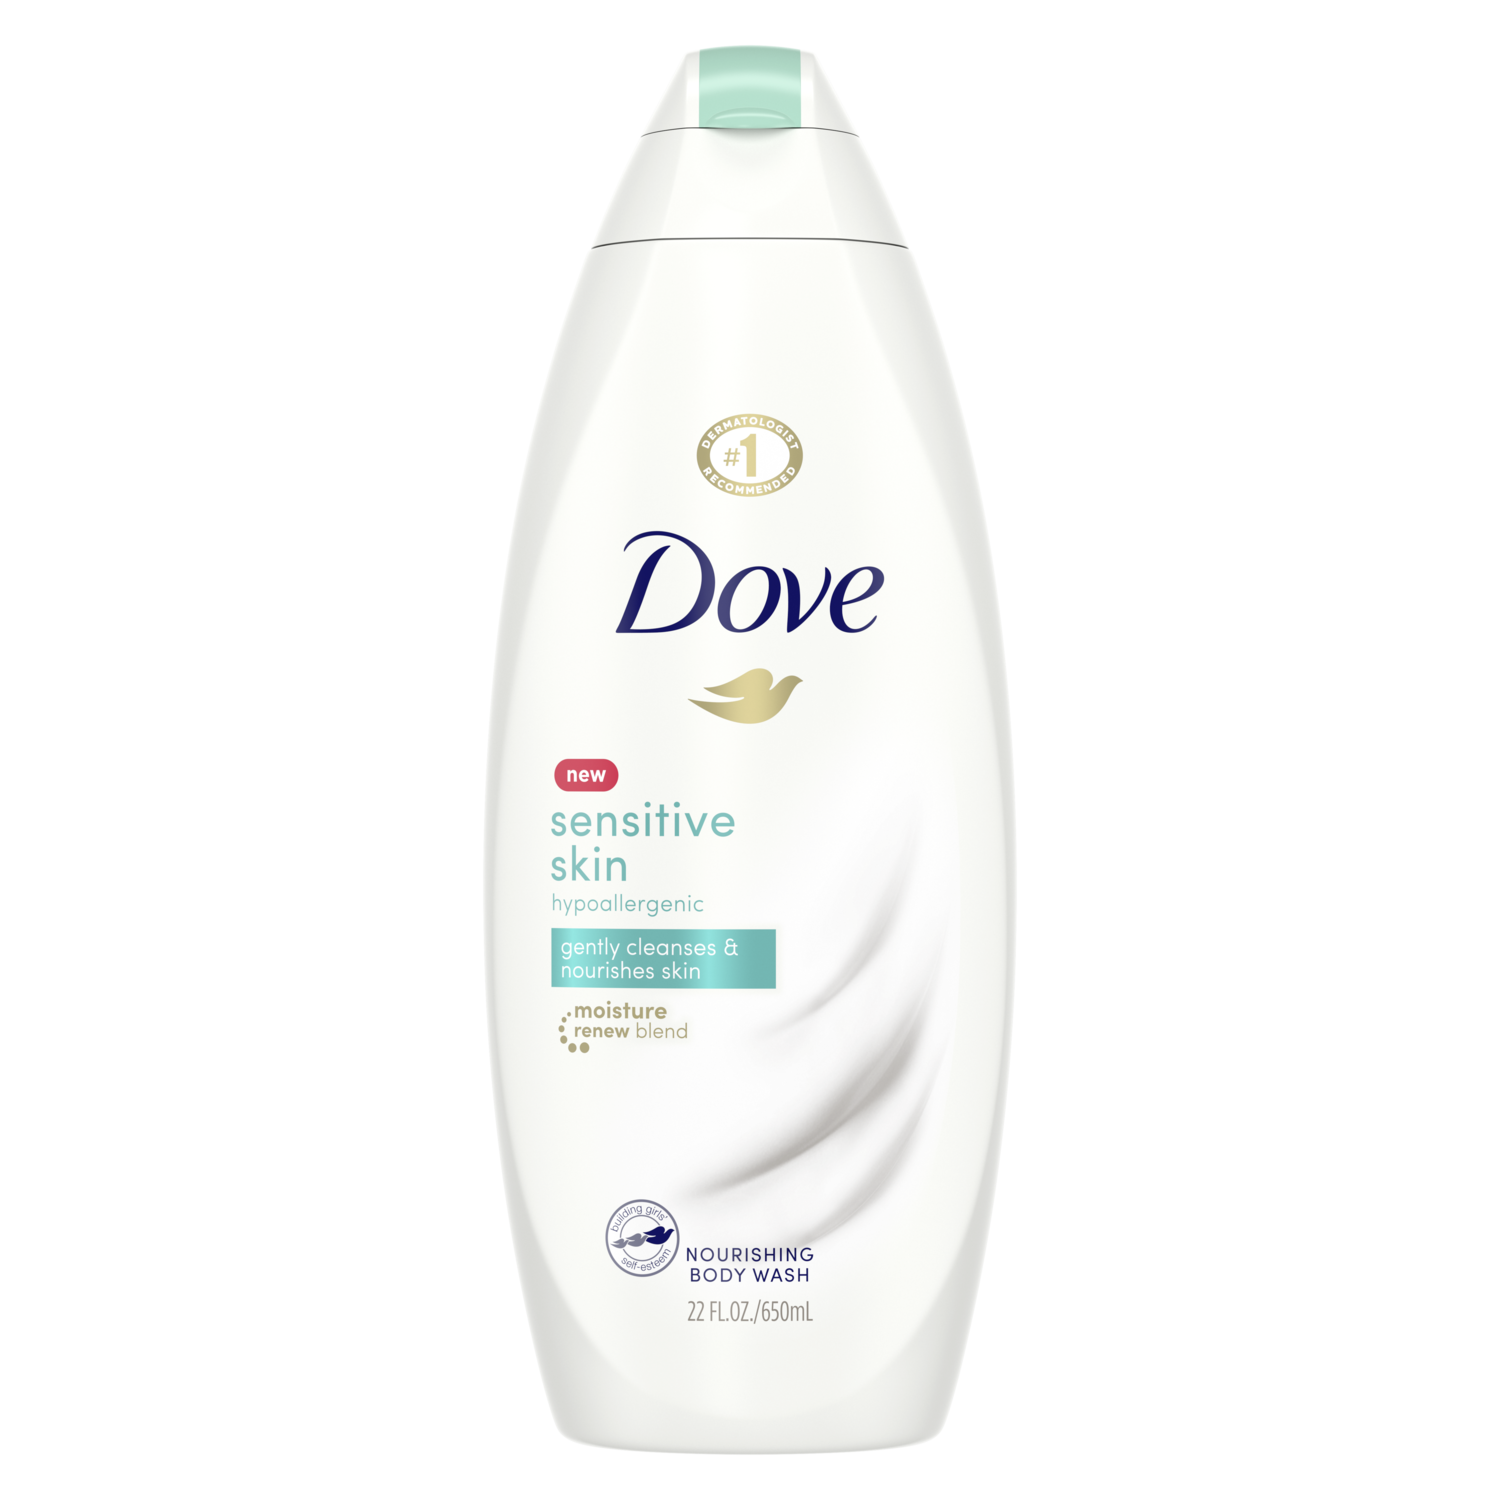 Dove Beauty + Dove Ultracare Crème Concentrated + Repair Conditioner